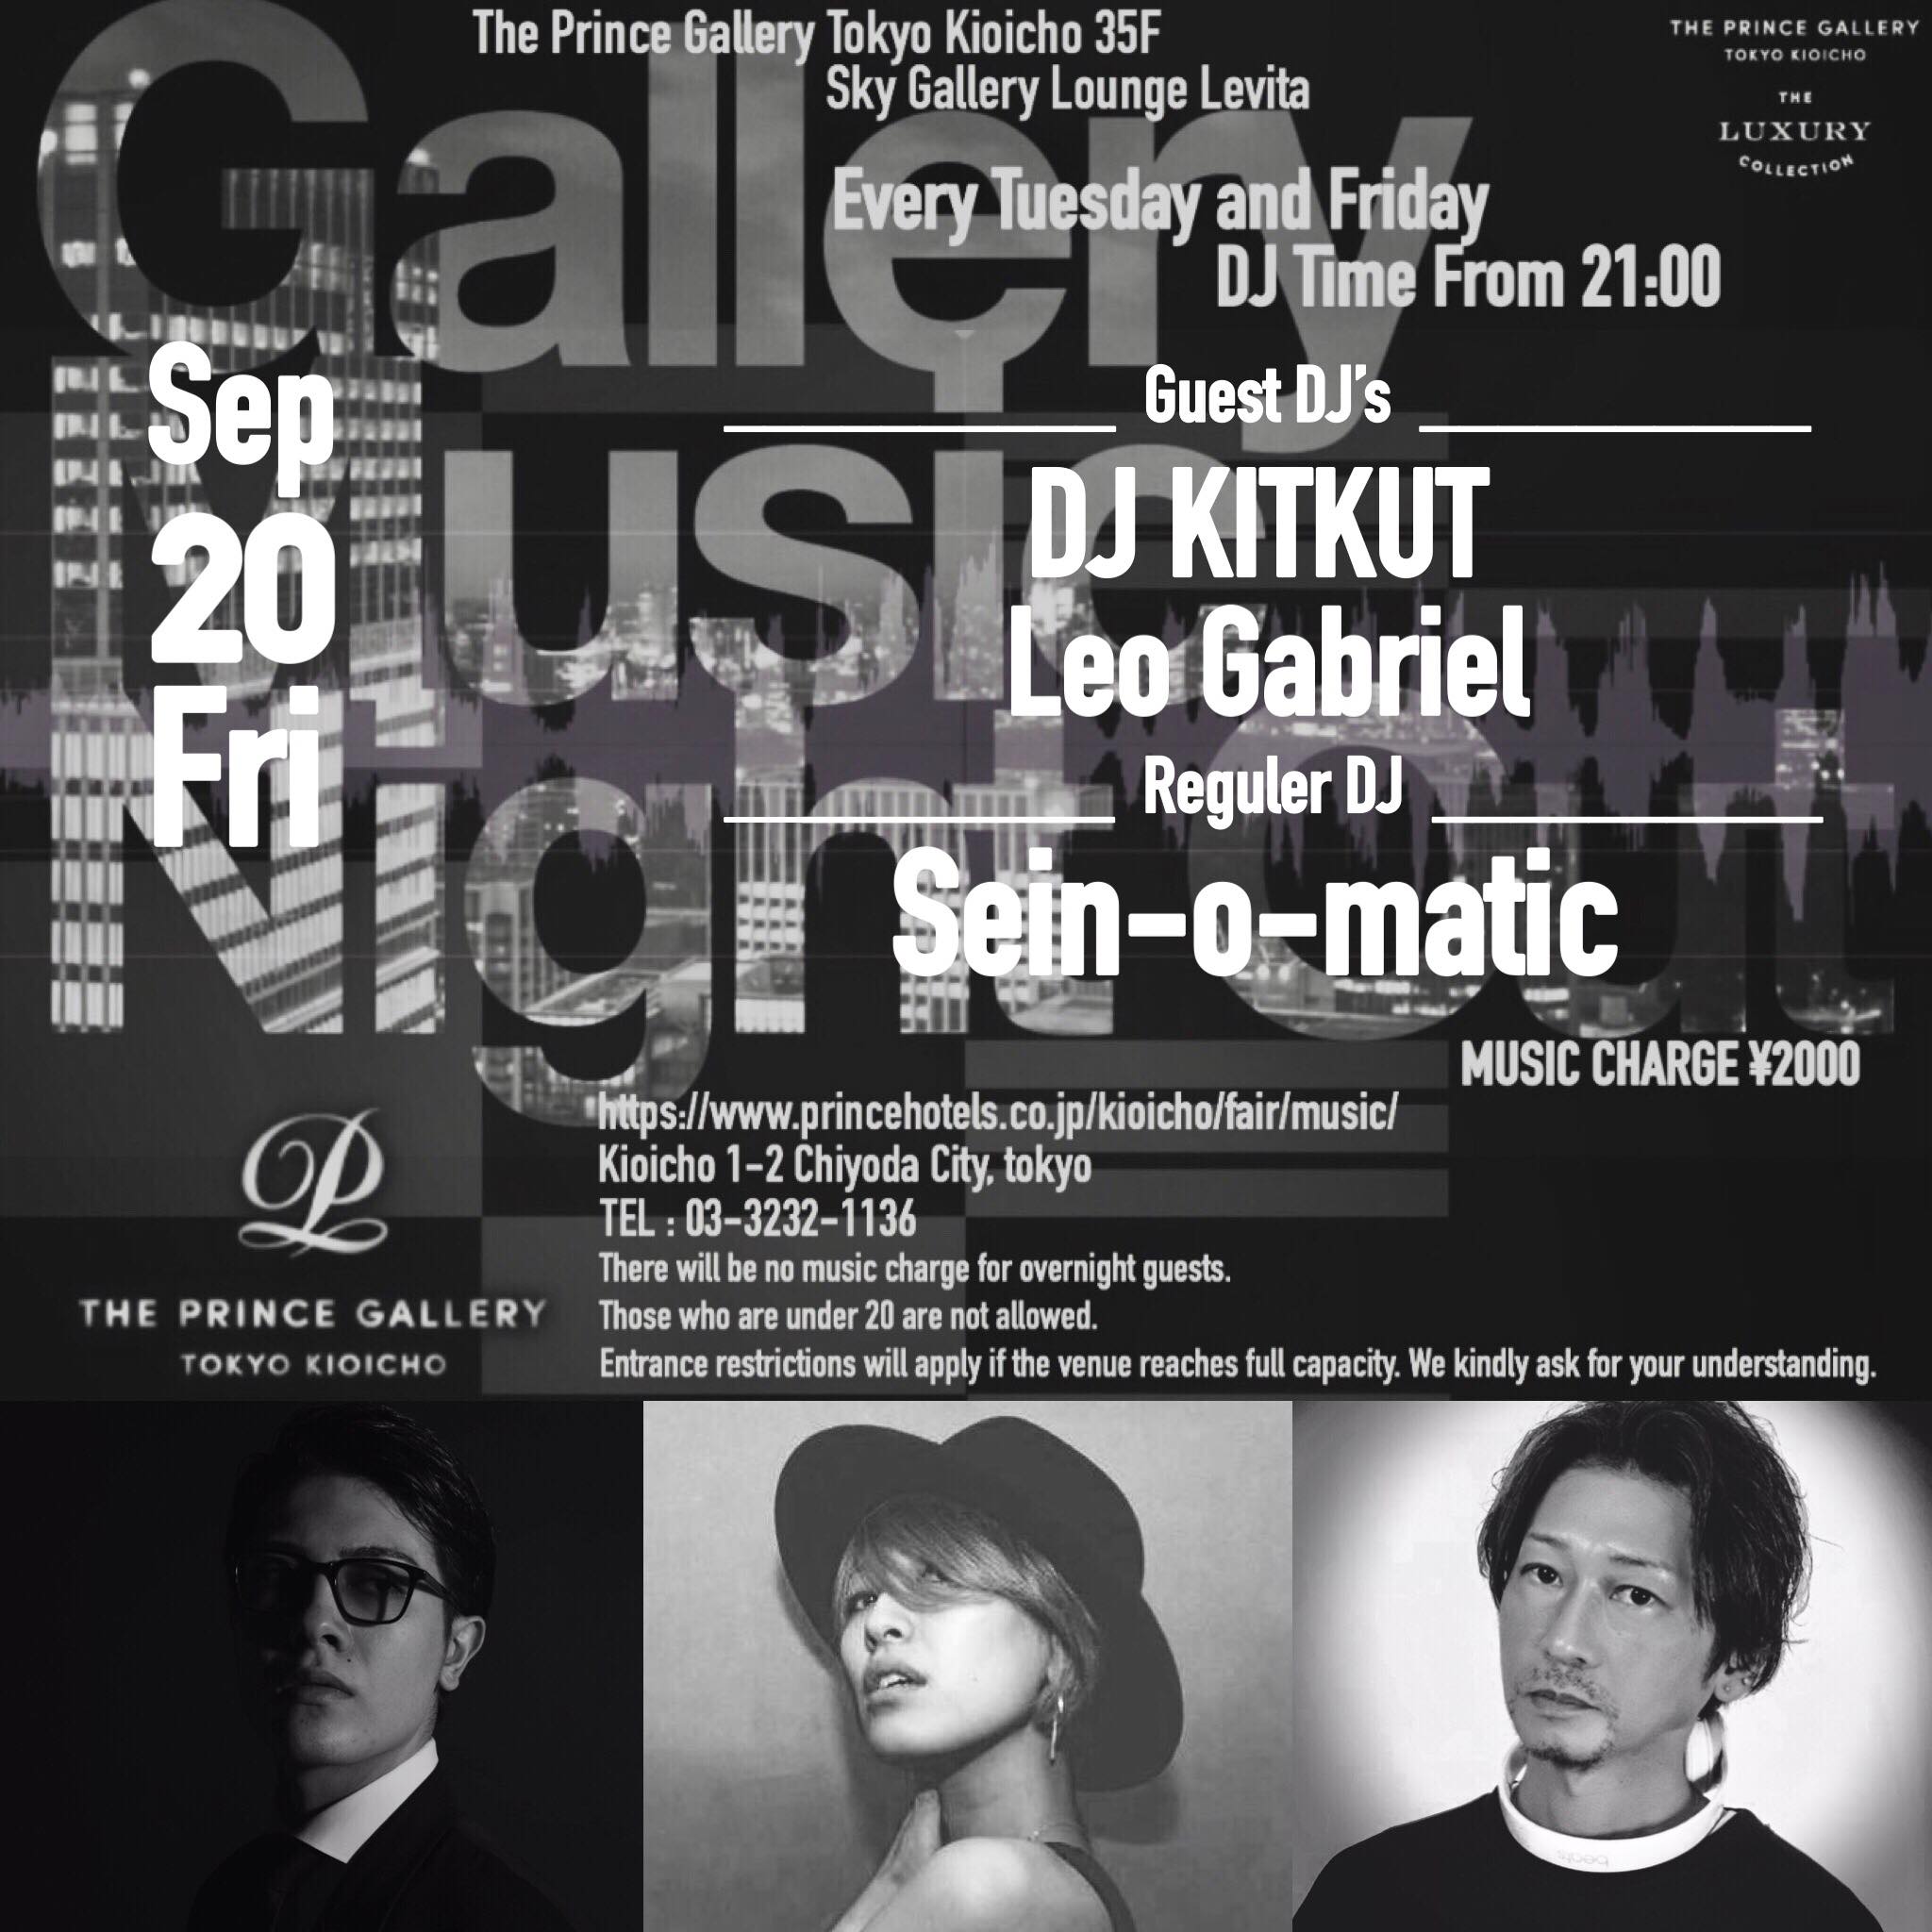 2019/9/20(fri) Gallery Music Night Out @ The Prince Gallery